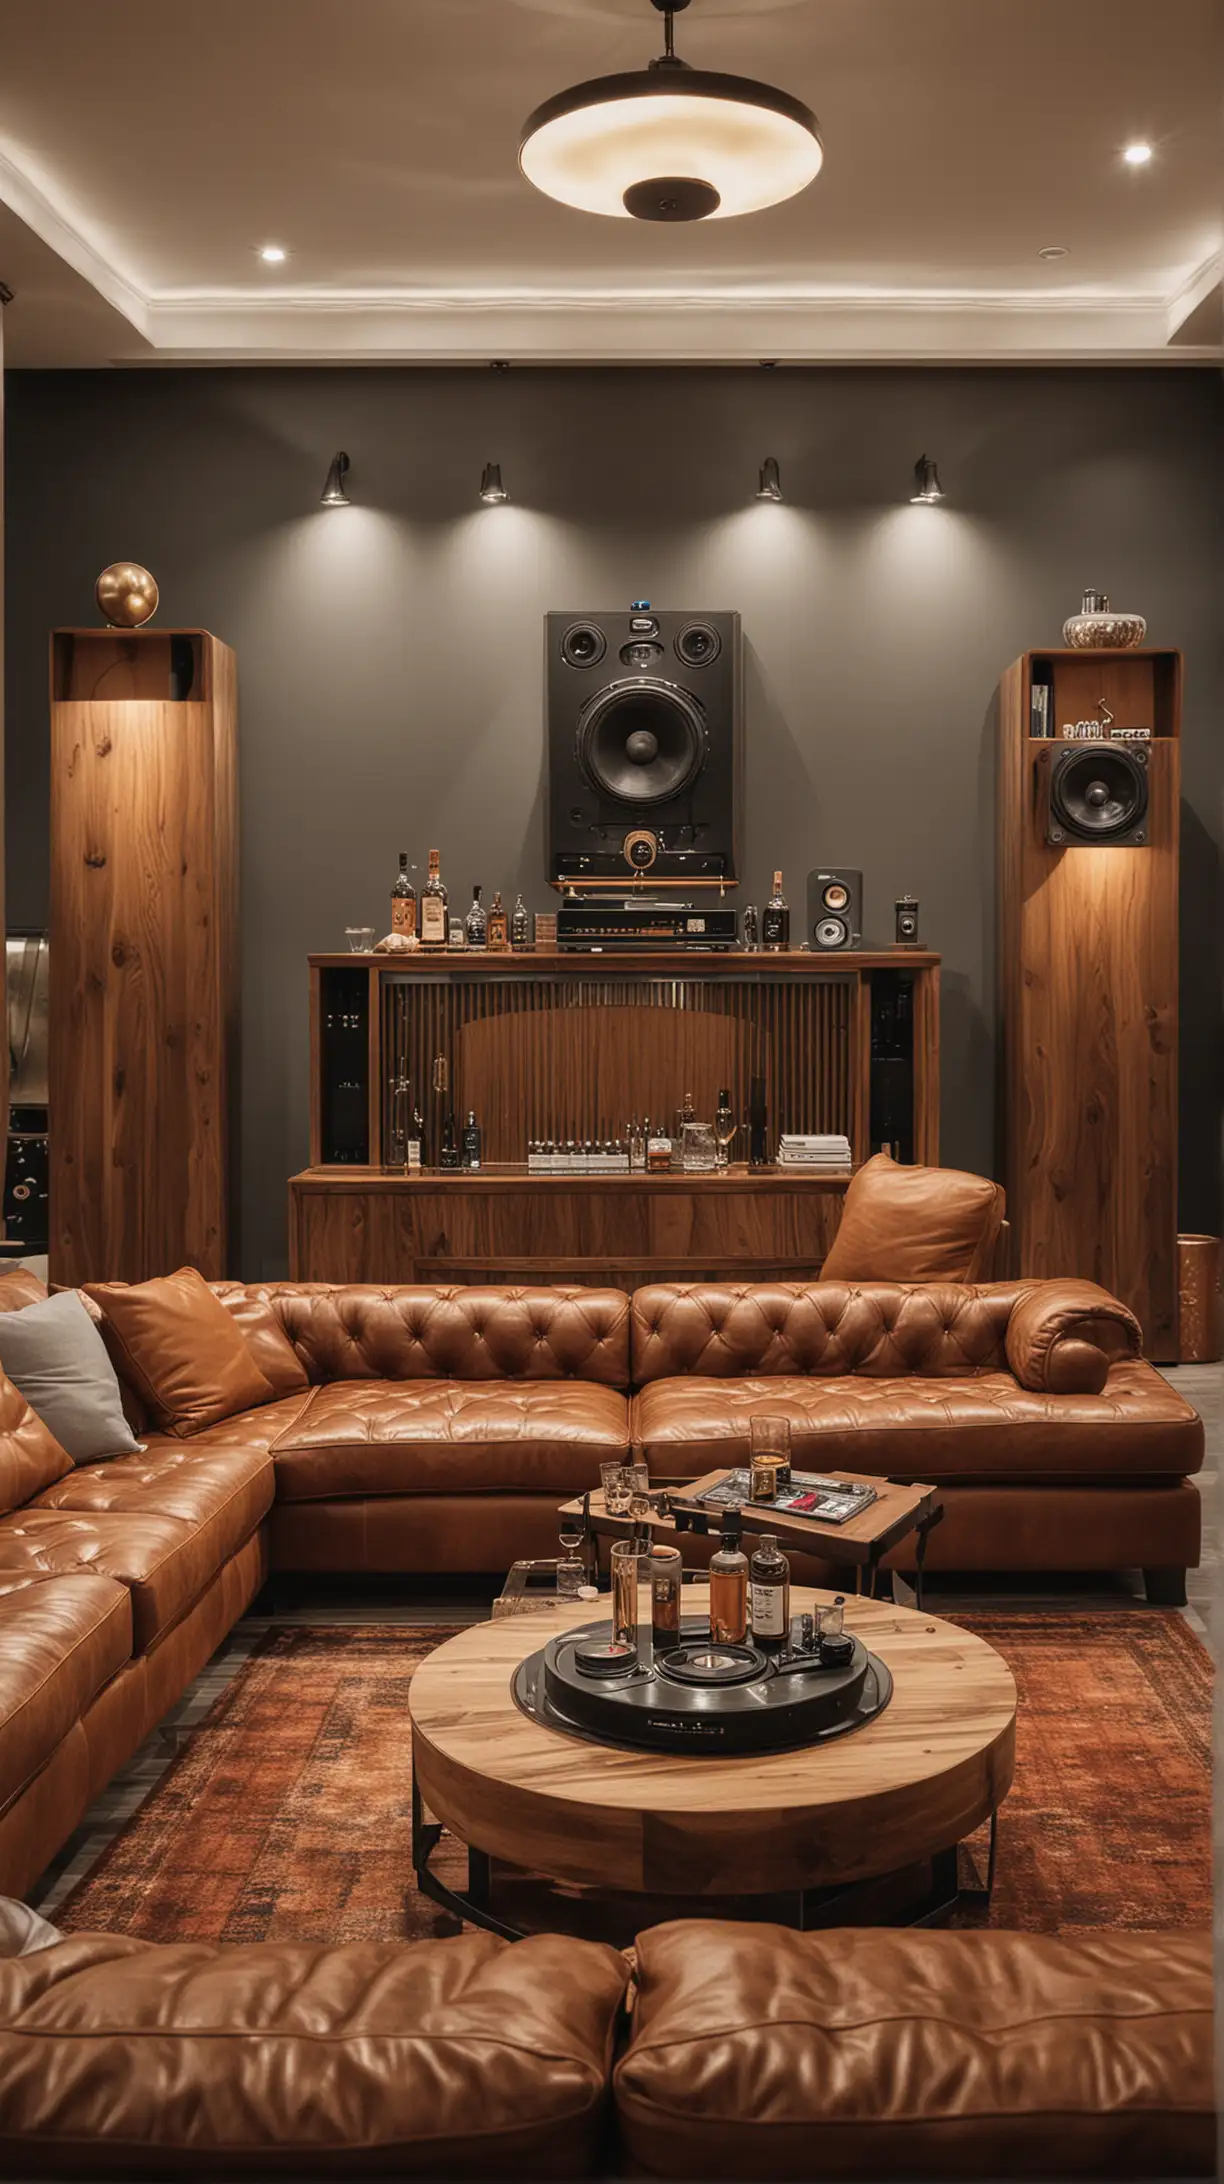 A modern whiskey lounge equipped with a high-quality sound system, featuring speakers and a vinyl record player, set for a music night.